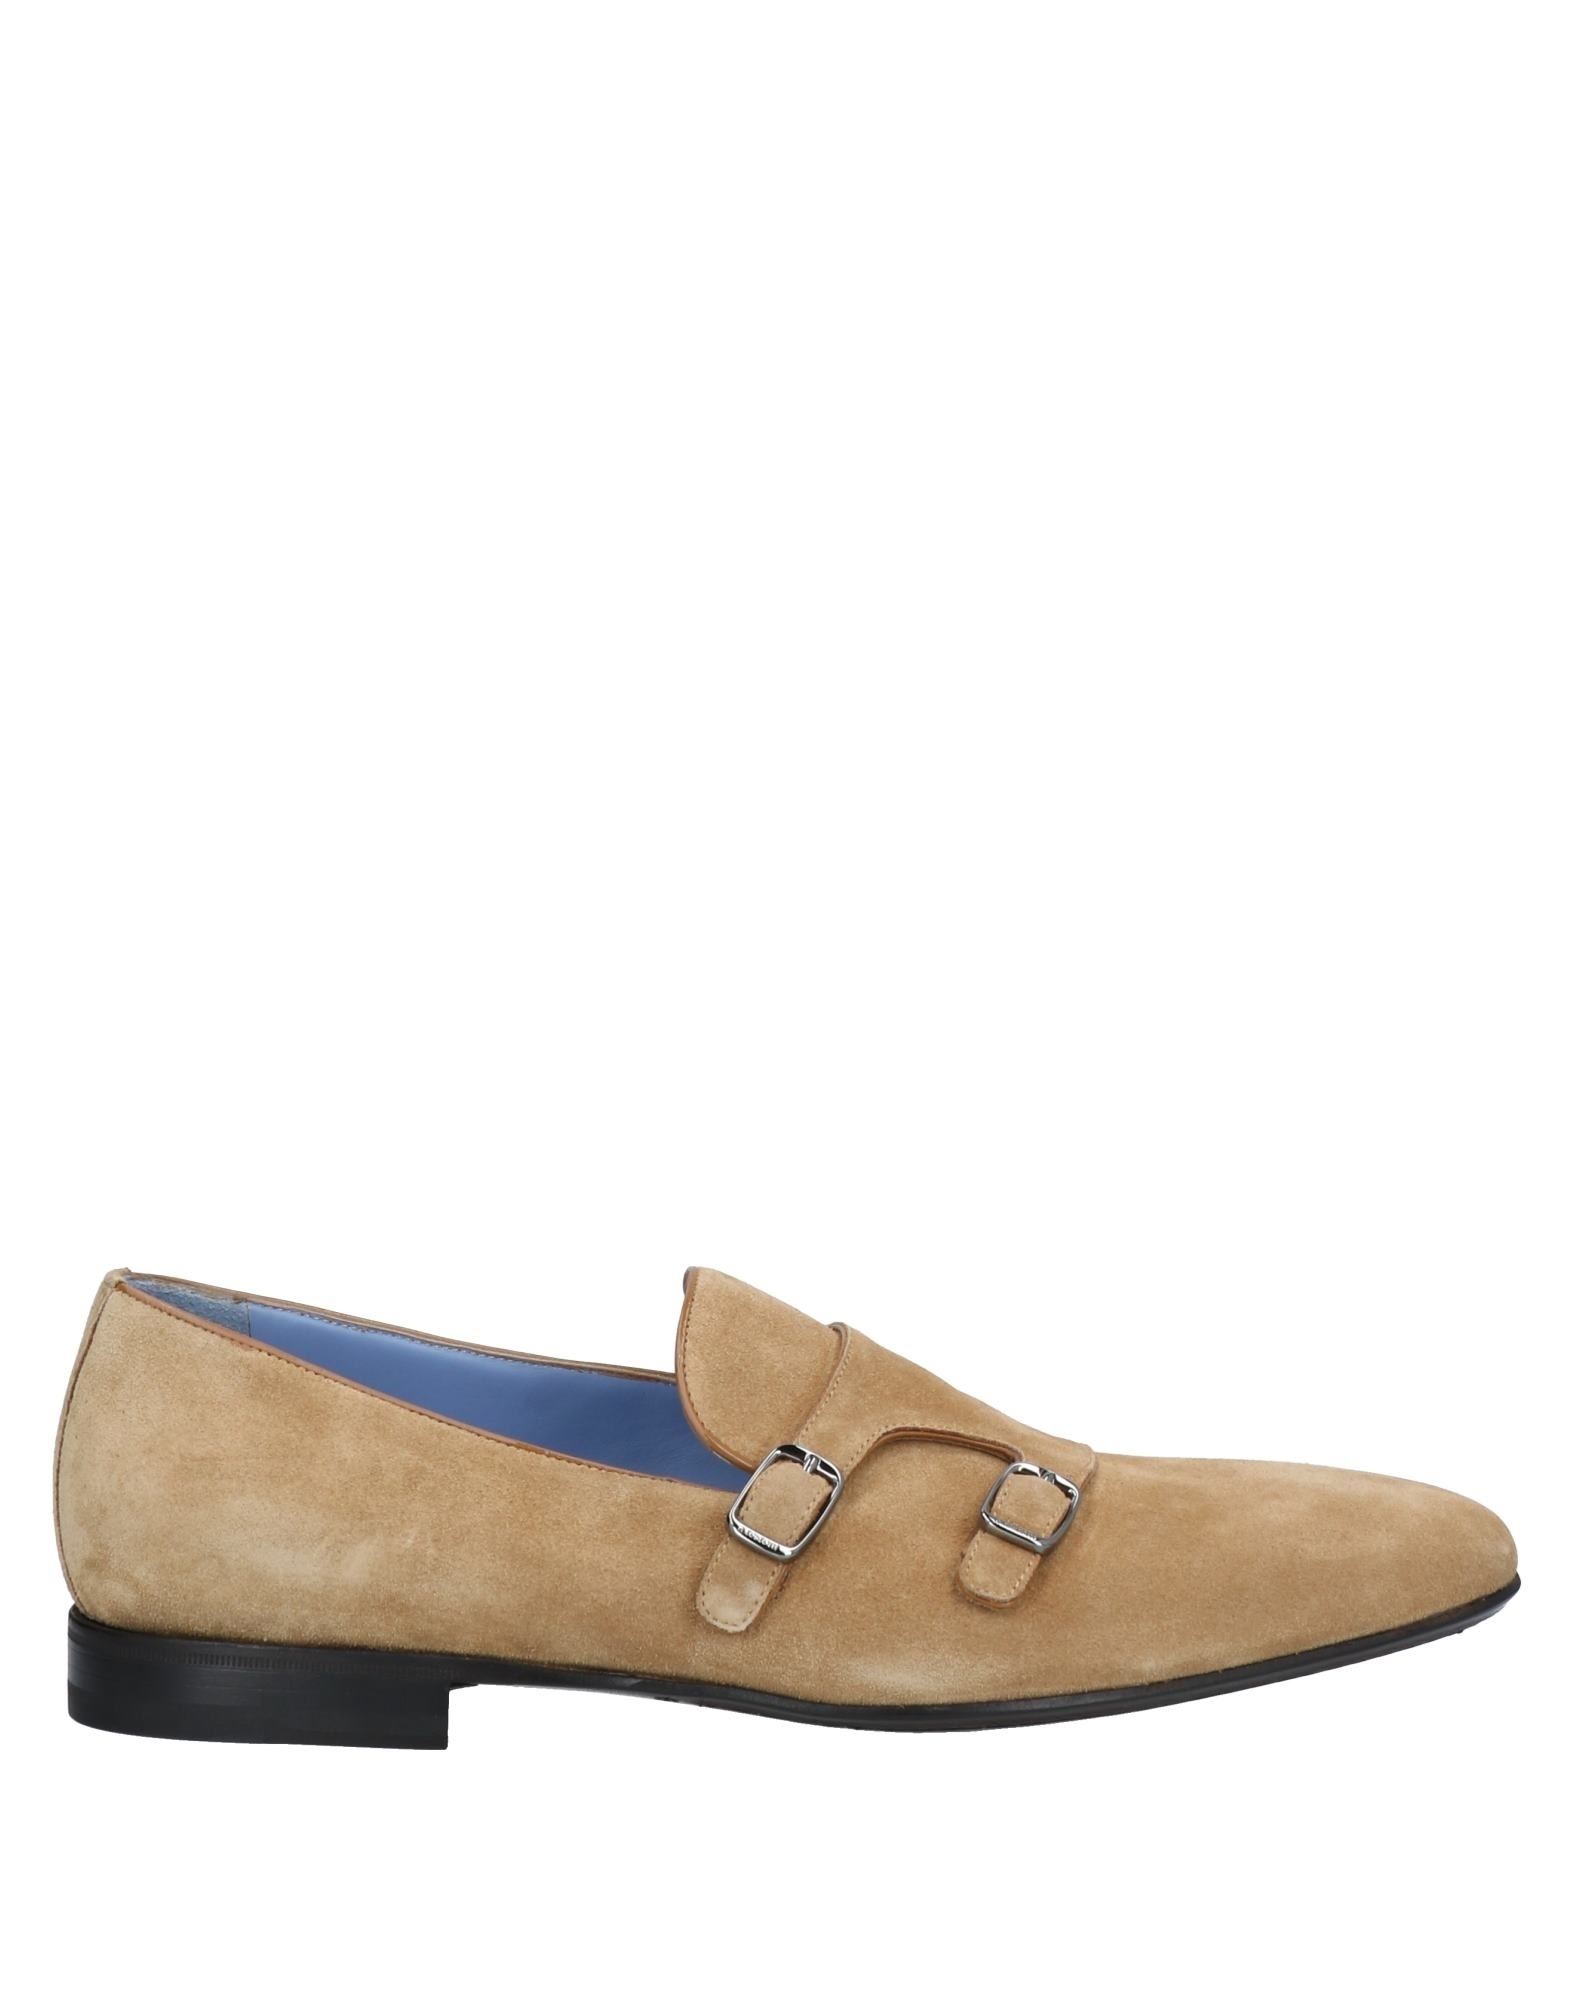 A.testoni Loafers In Sand